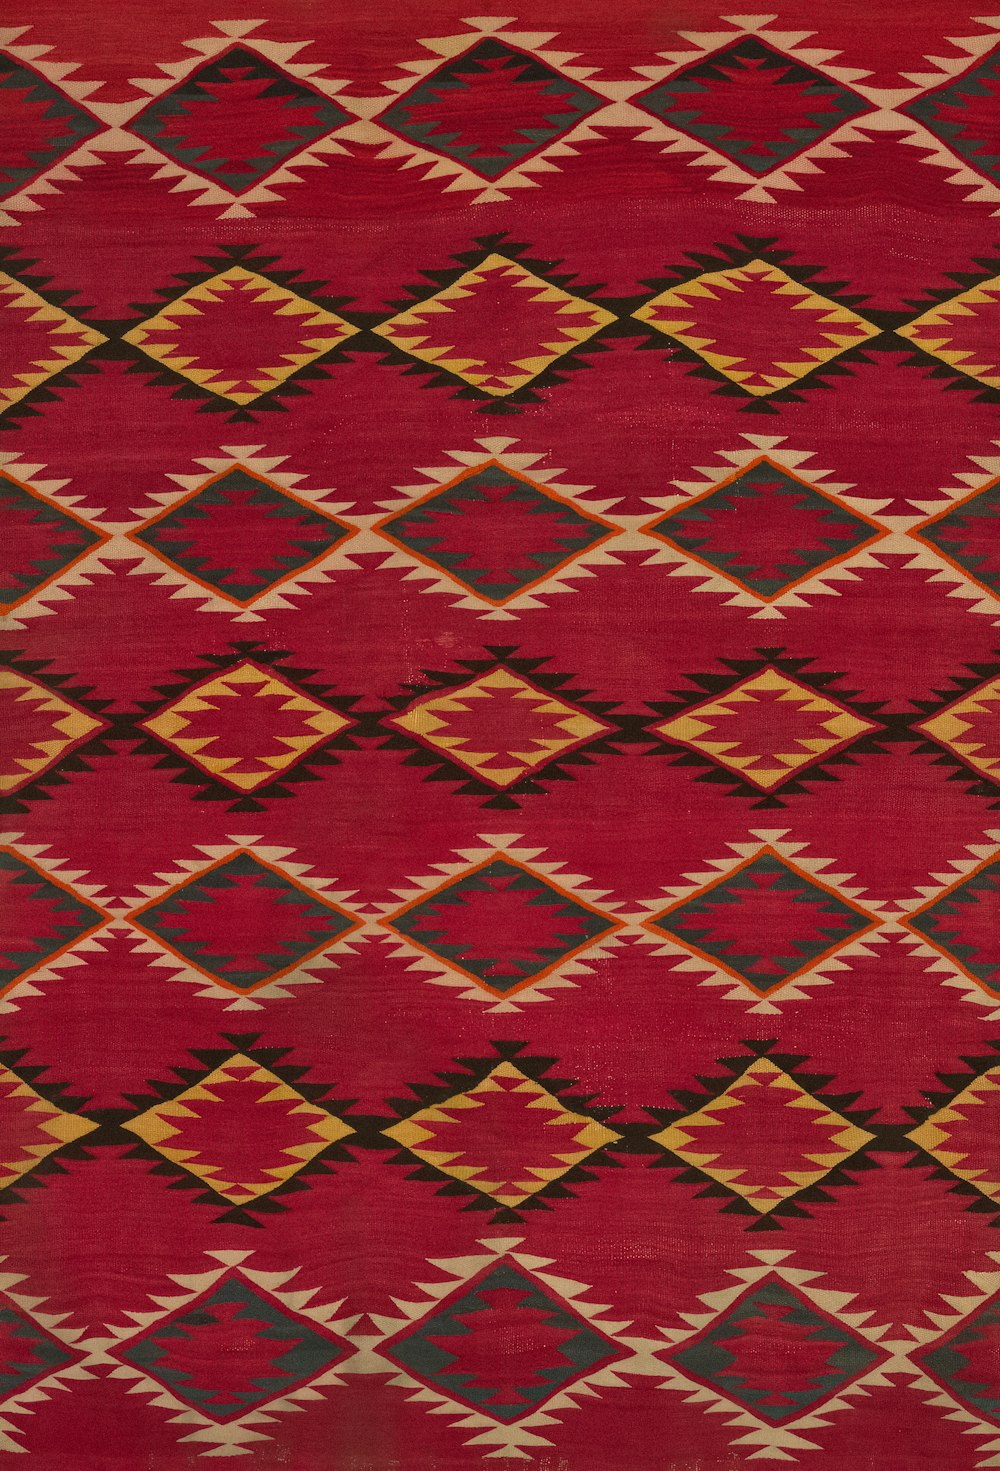 a red and yellow rug with a diamond pattern